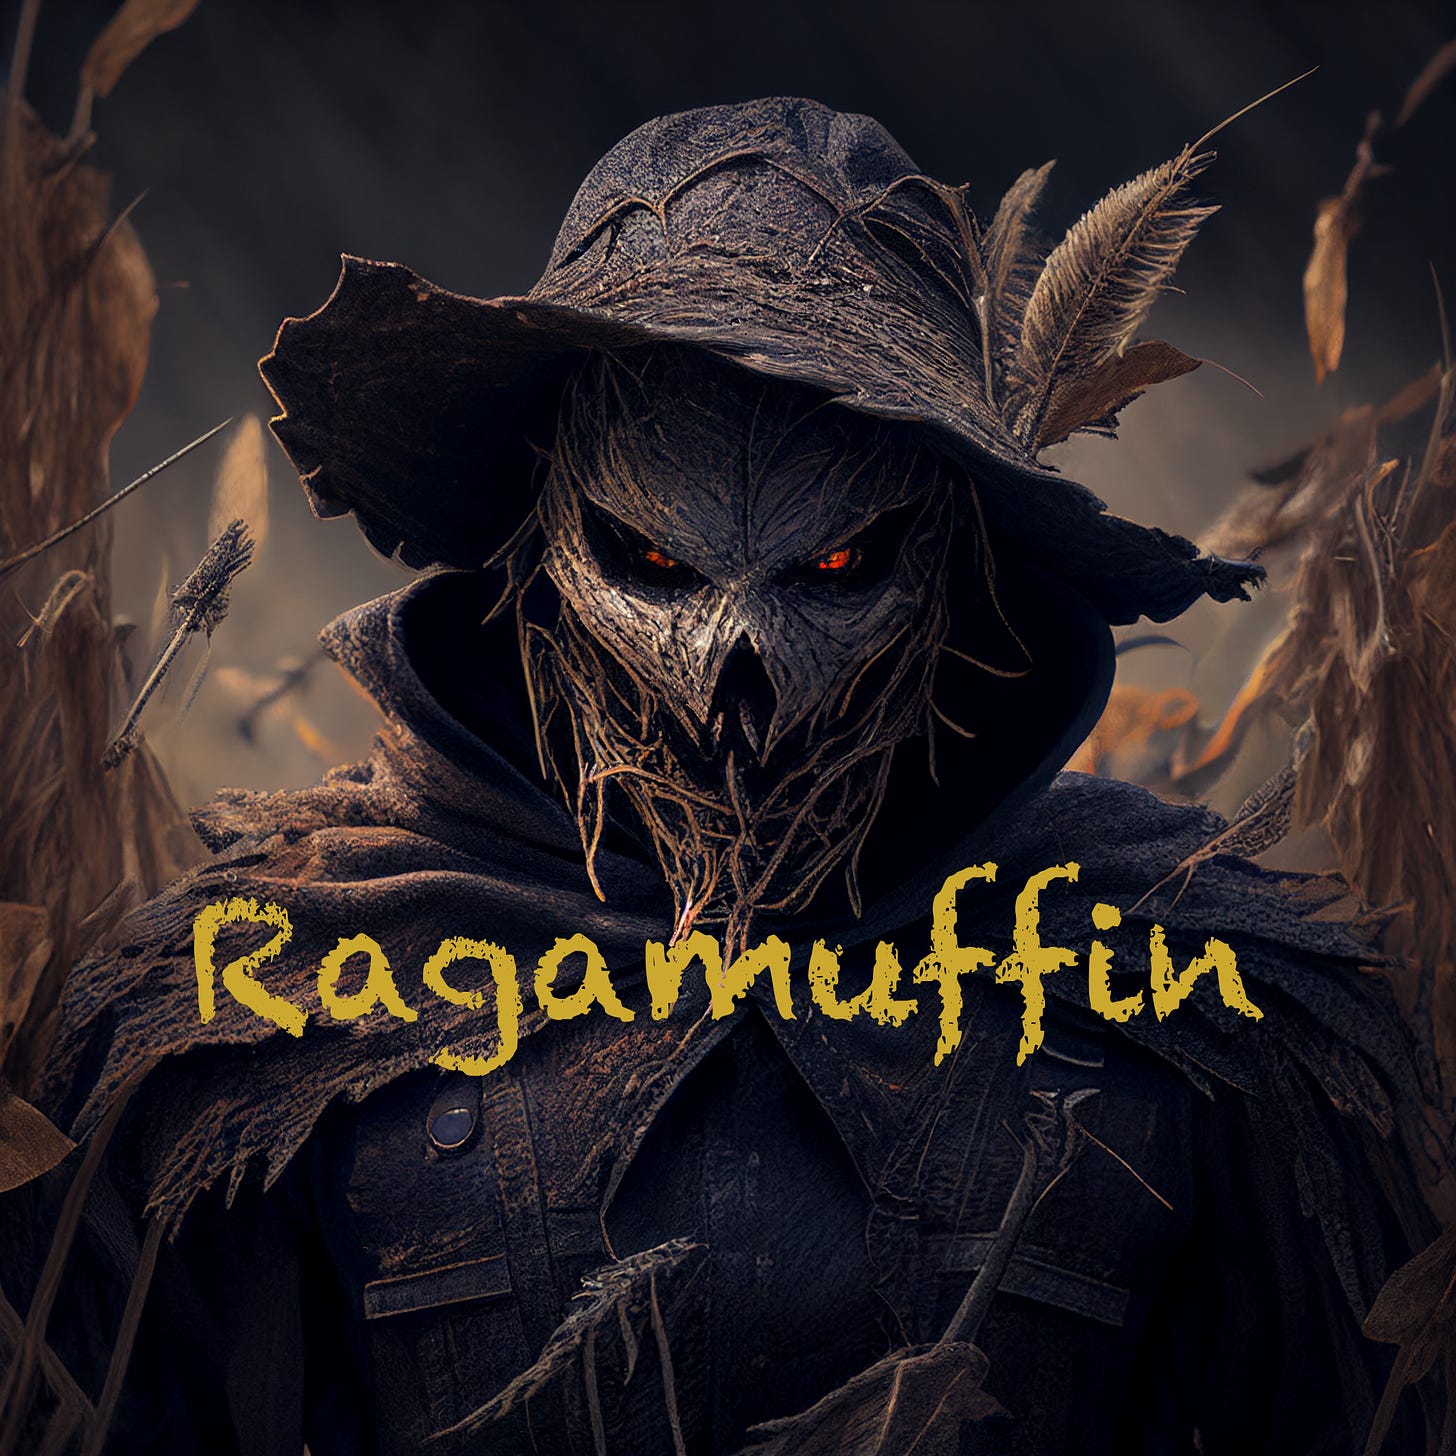 A scary scarecrow named Ragamuffin.